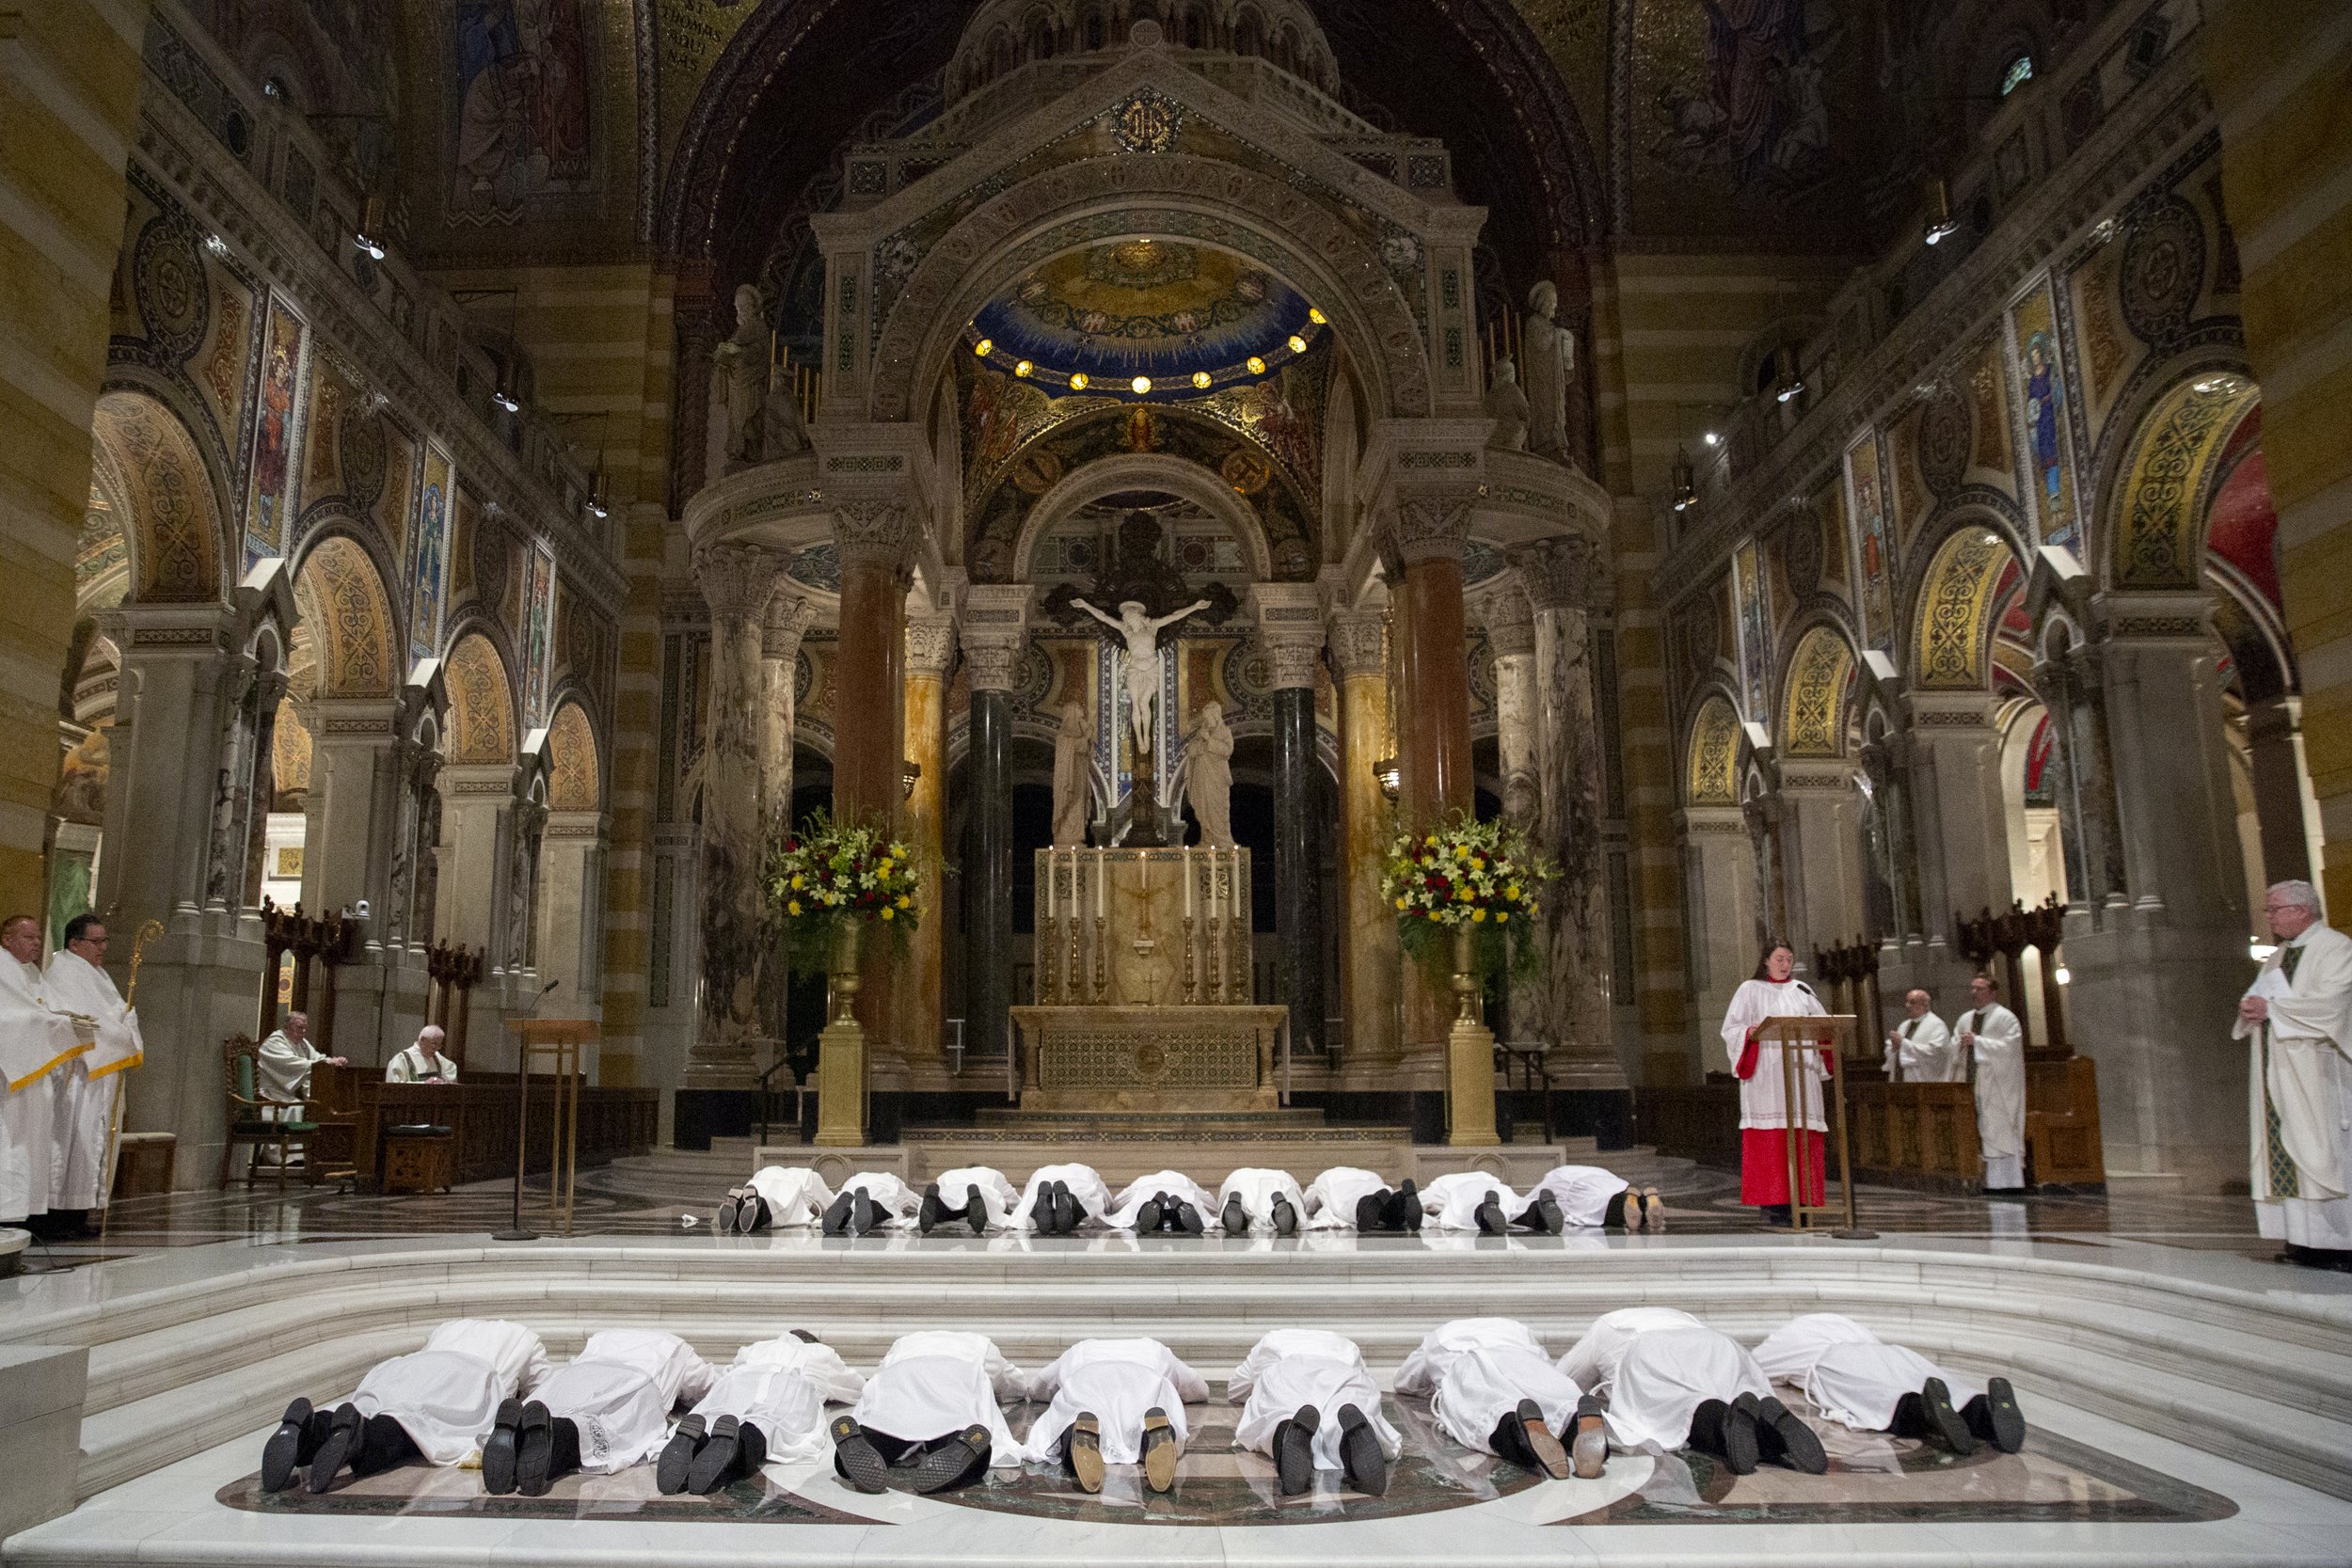  Eighteen permanent deacon ordination candidates lay prostrate during the Litany of Supplication during the Rite of Ordination of Deacons on June 4 at the Cathedral Basilica of Saint Louis in St. Louis, Missouri.  